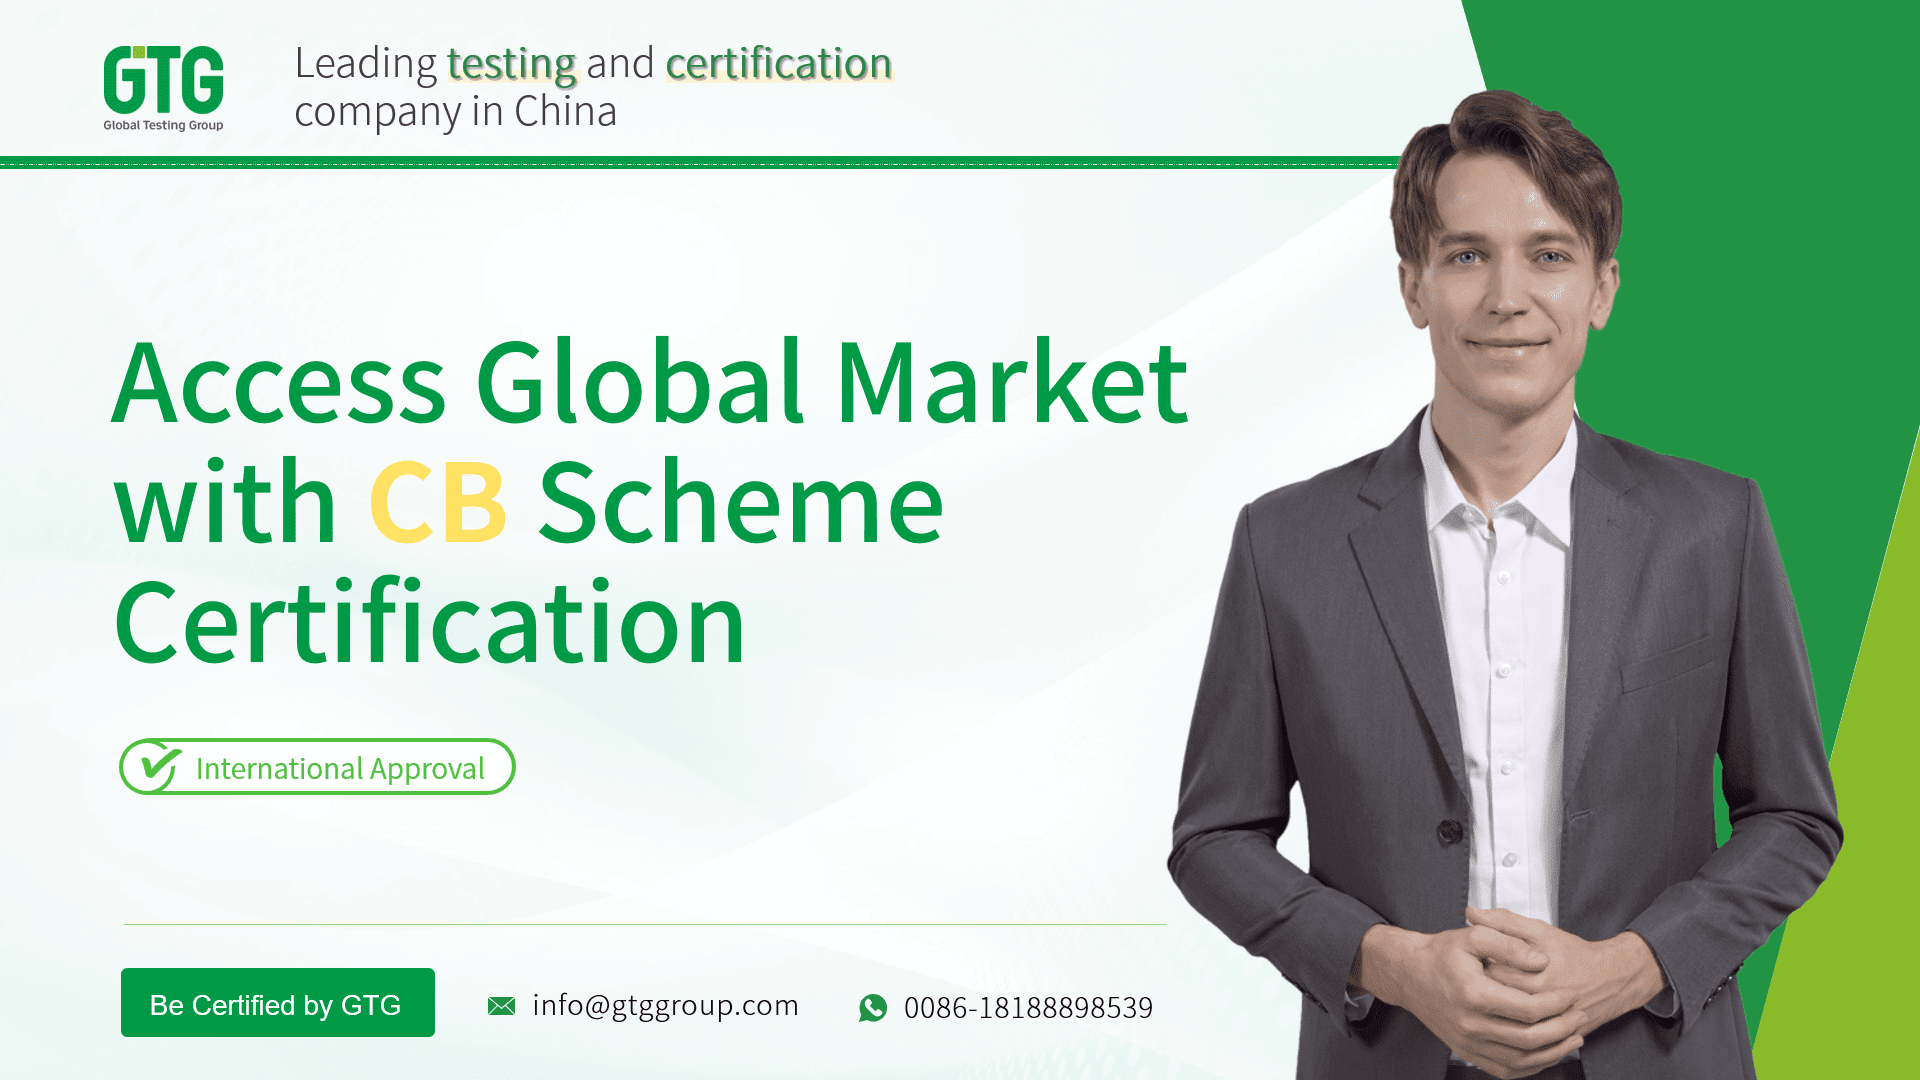 GTG Provides IECEE Certification Body (CB) Scheme Testing and Certification Service